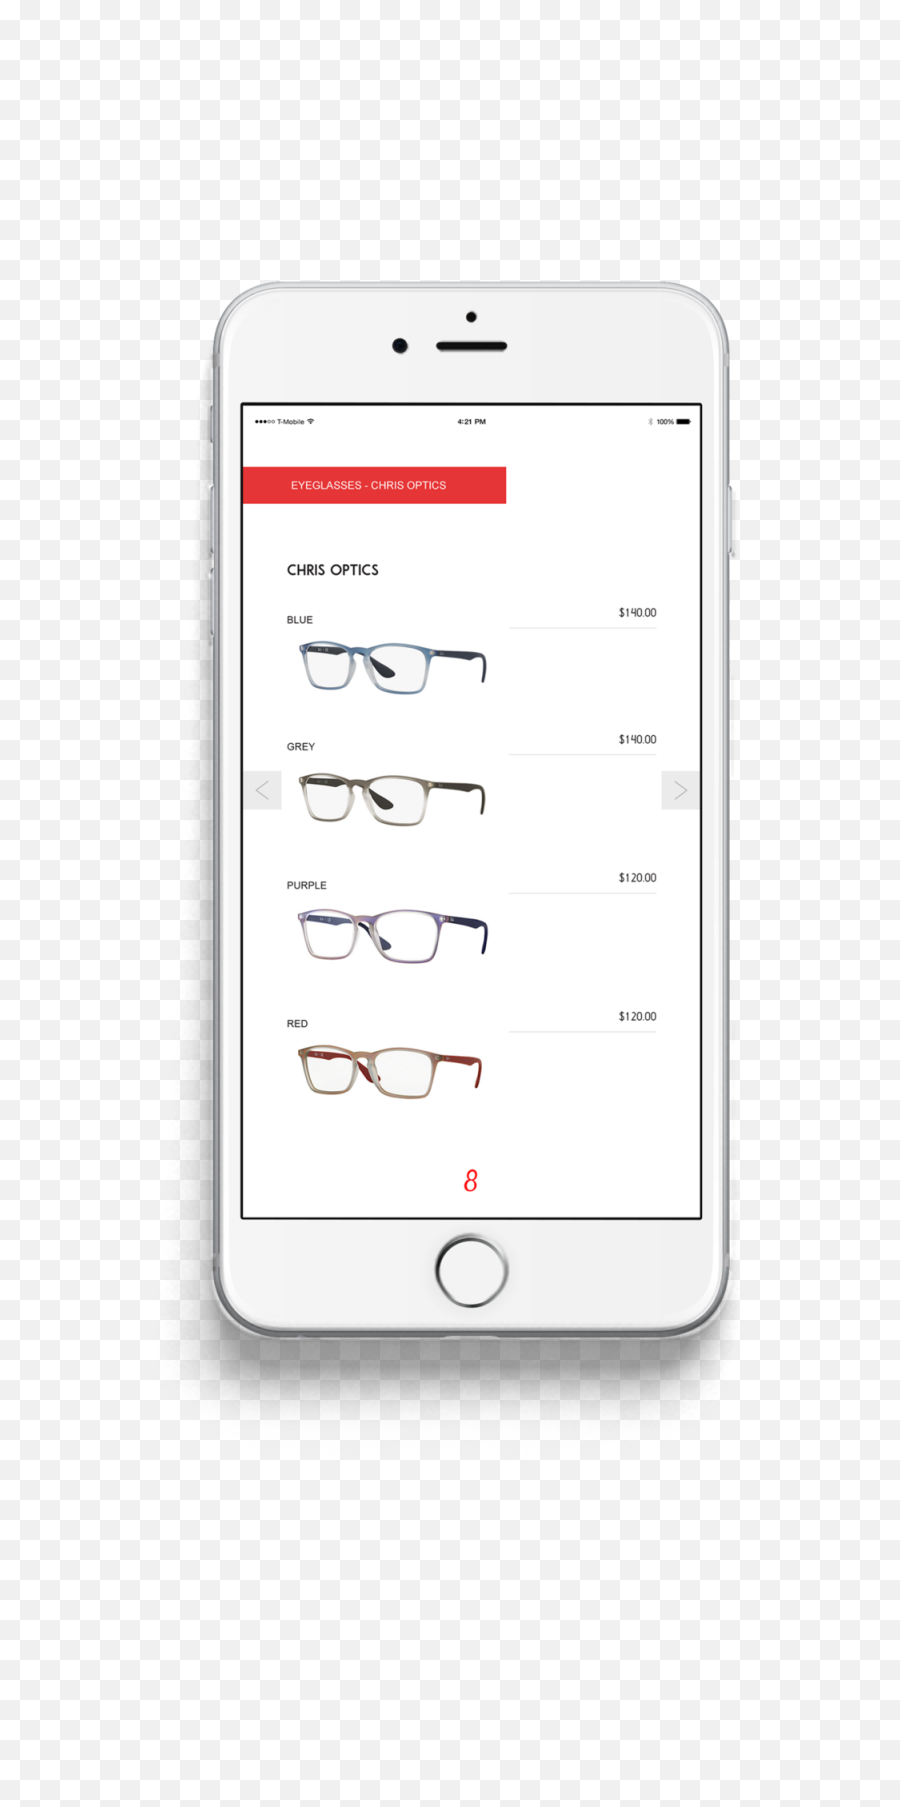 Download Iphone Mockup Png Image With No Background - Pngkeycom Glasses,Iphone Mockup Png